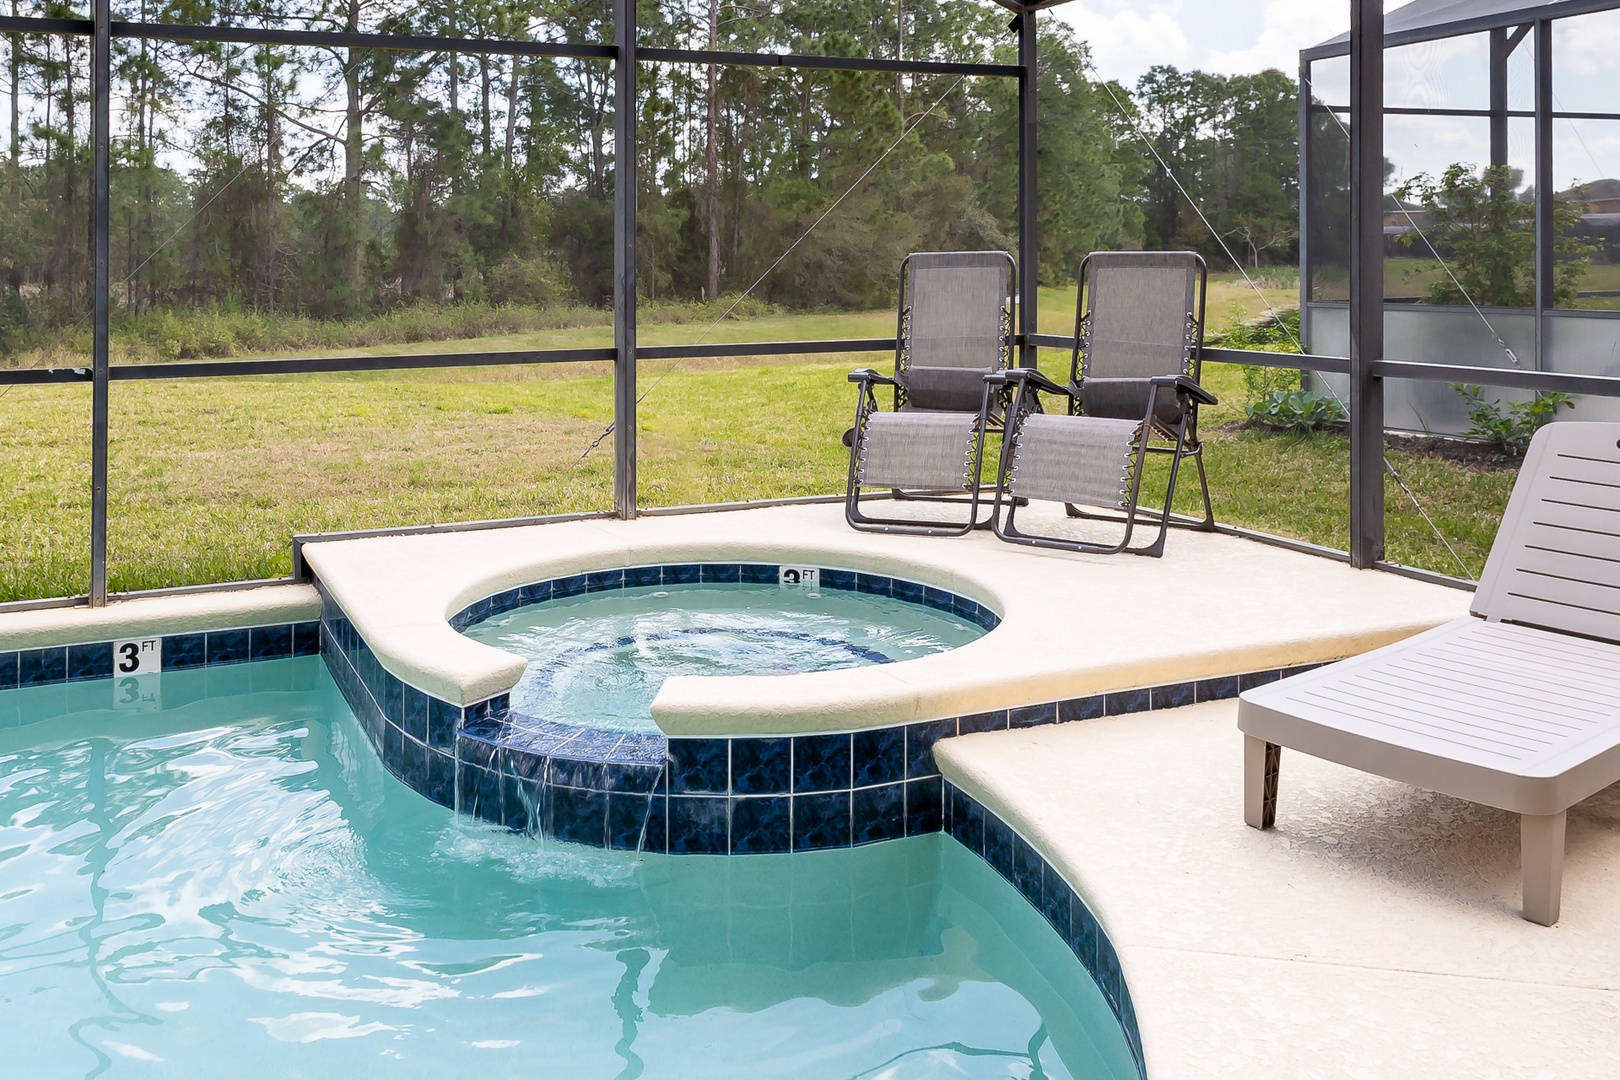 Lounge the day away or make a splash in your sparkling private pool